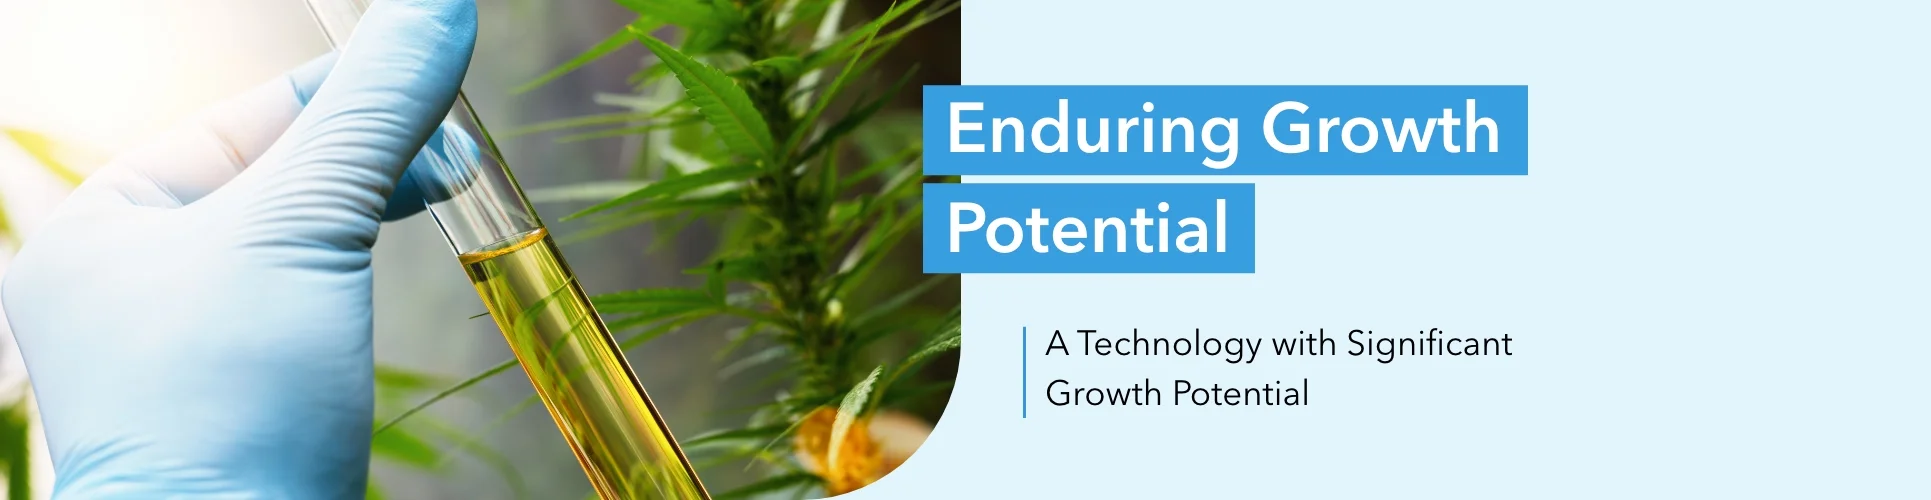 Enduring Growth Potential